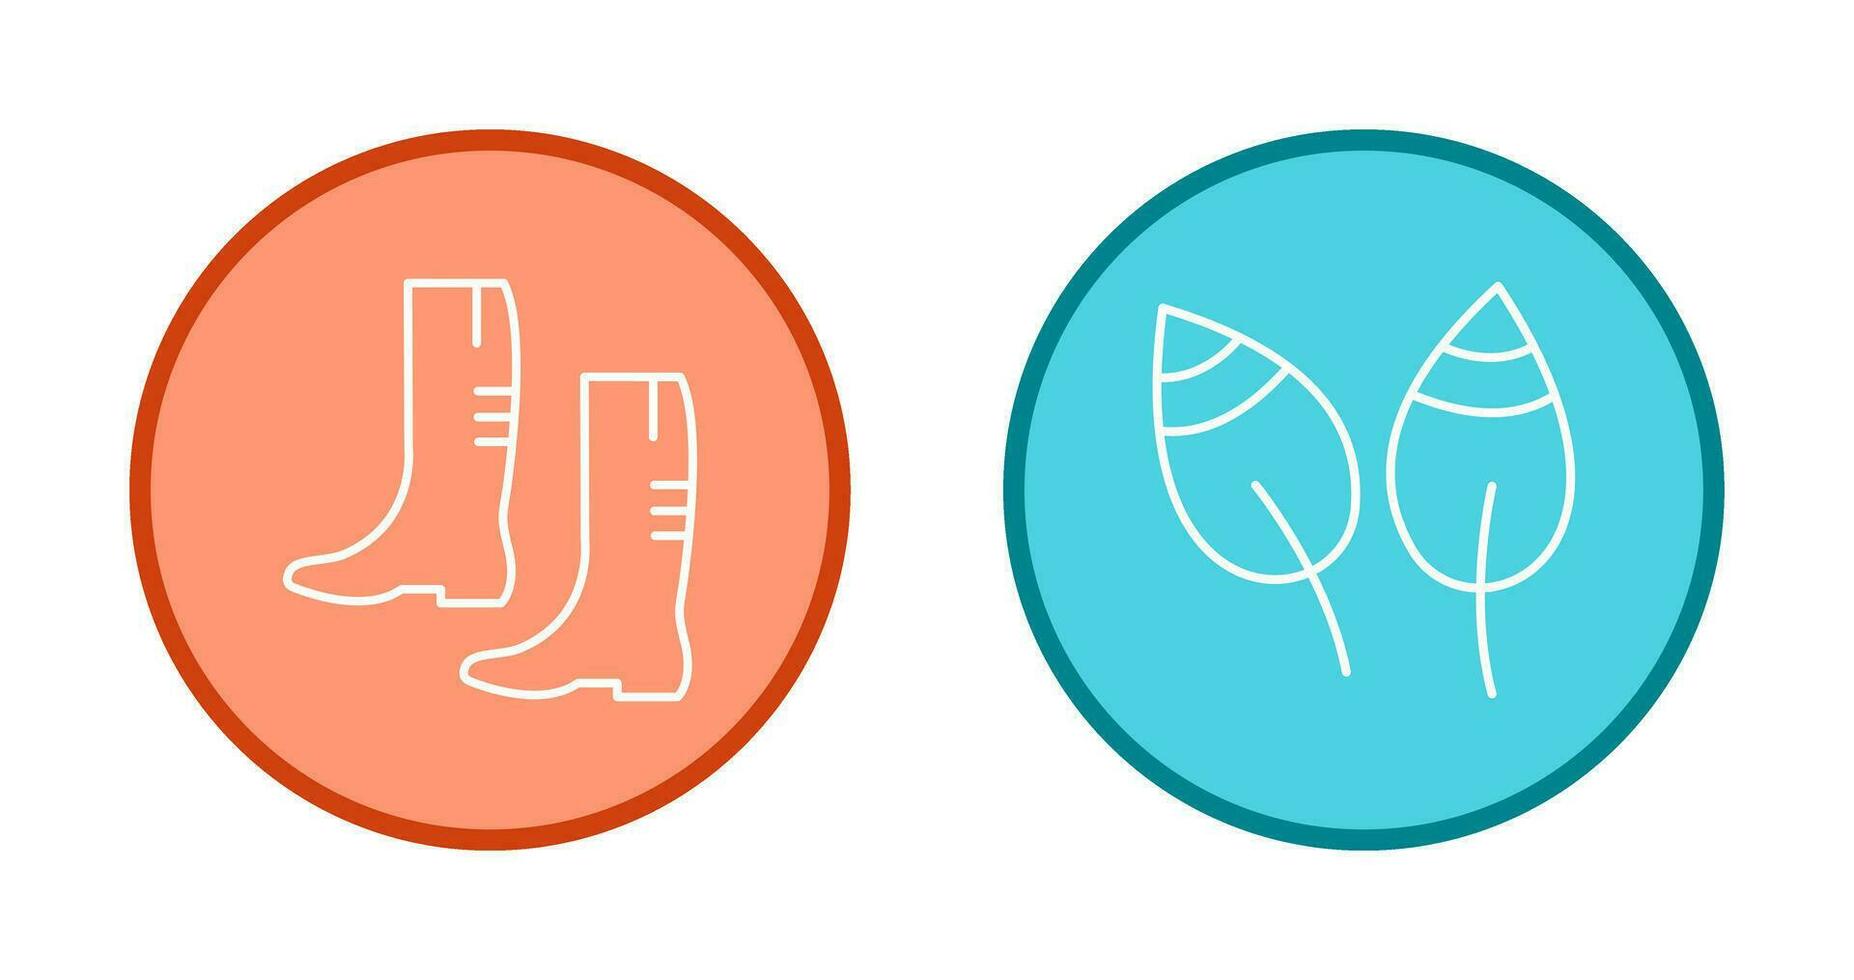 Gardening Boots and Leaves Icon vector